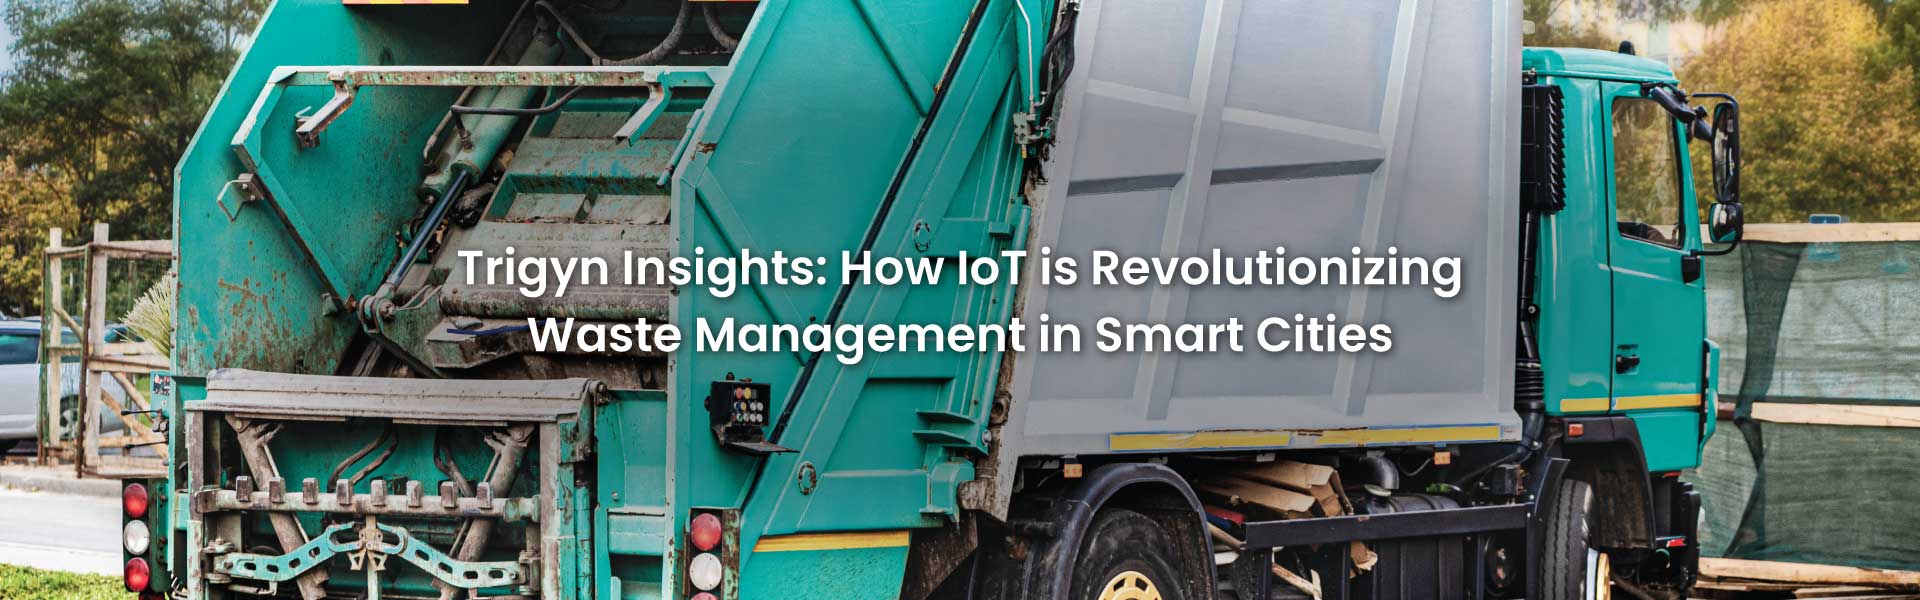 Waste Management in Smart Cities